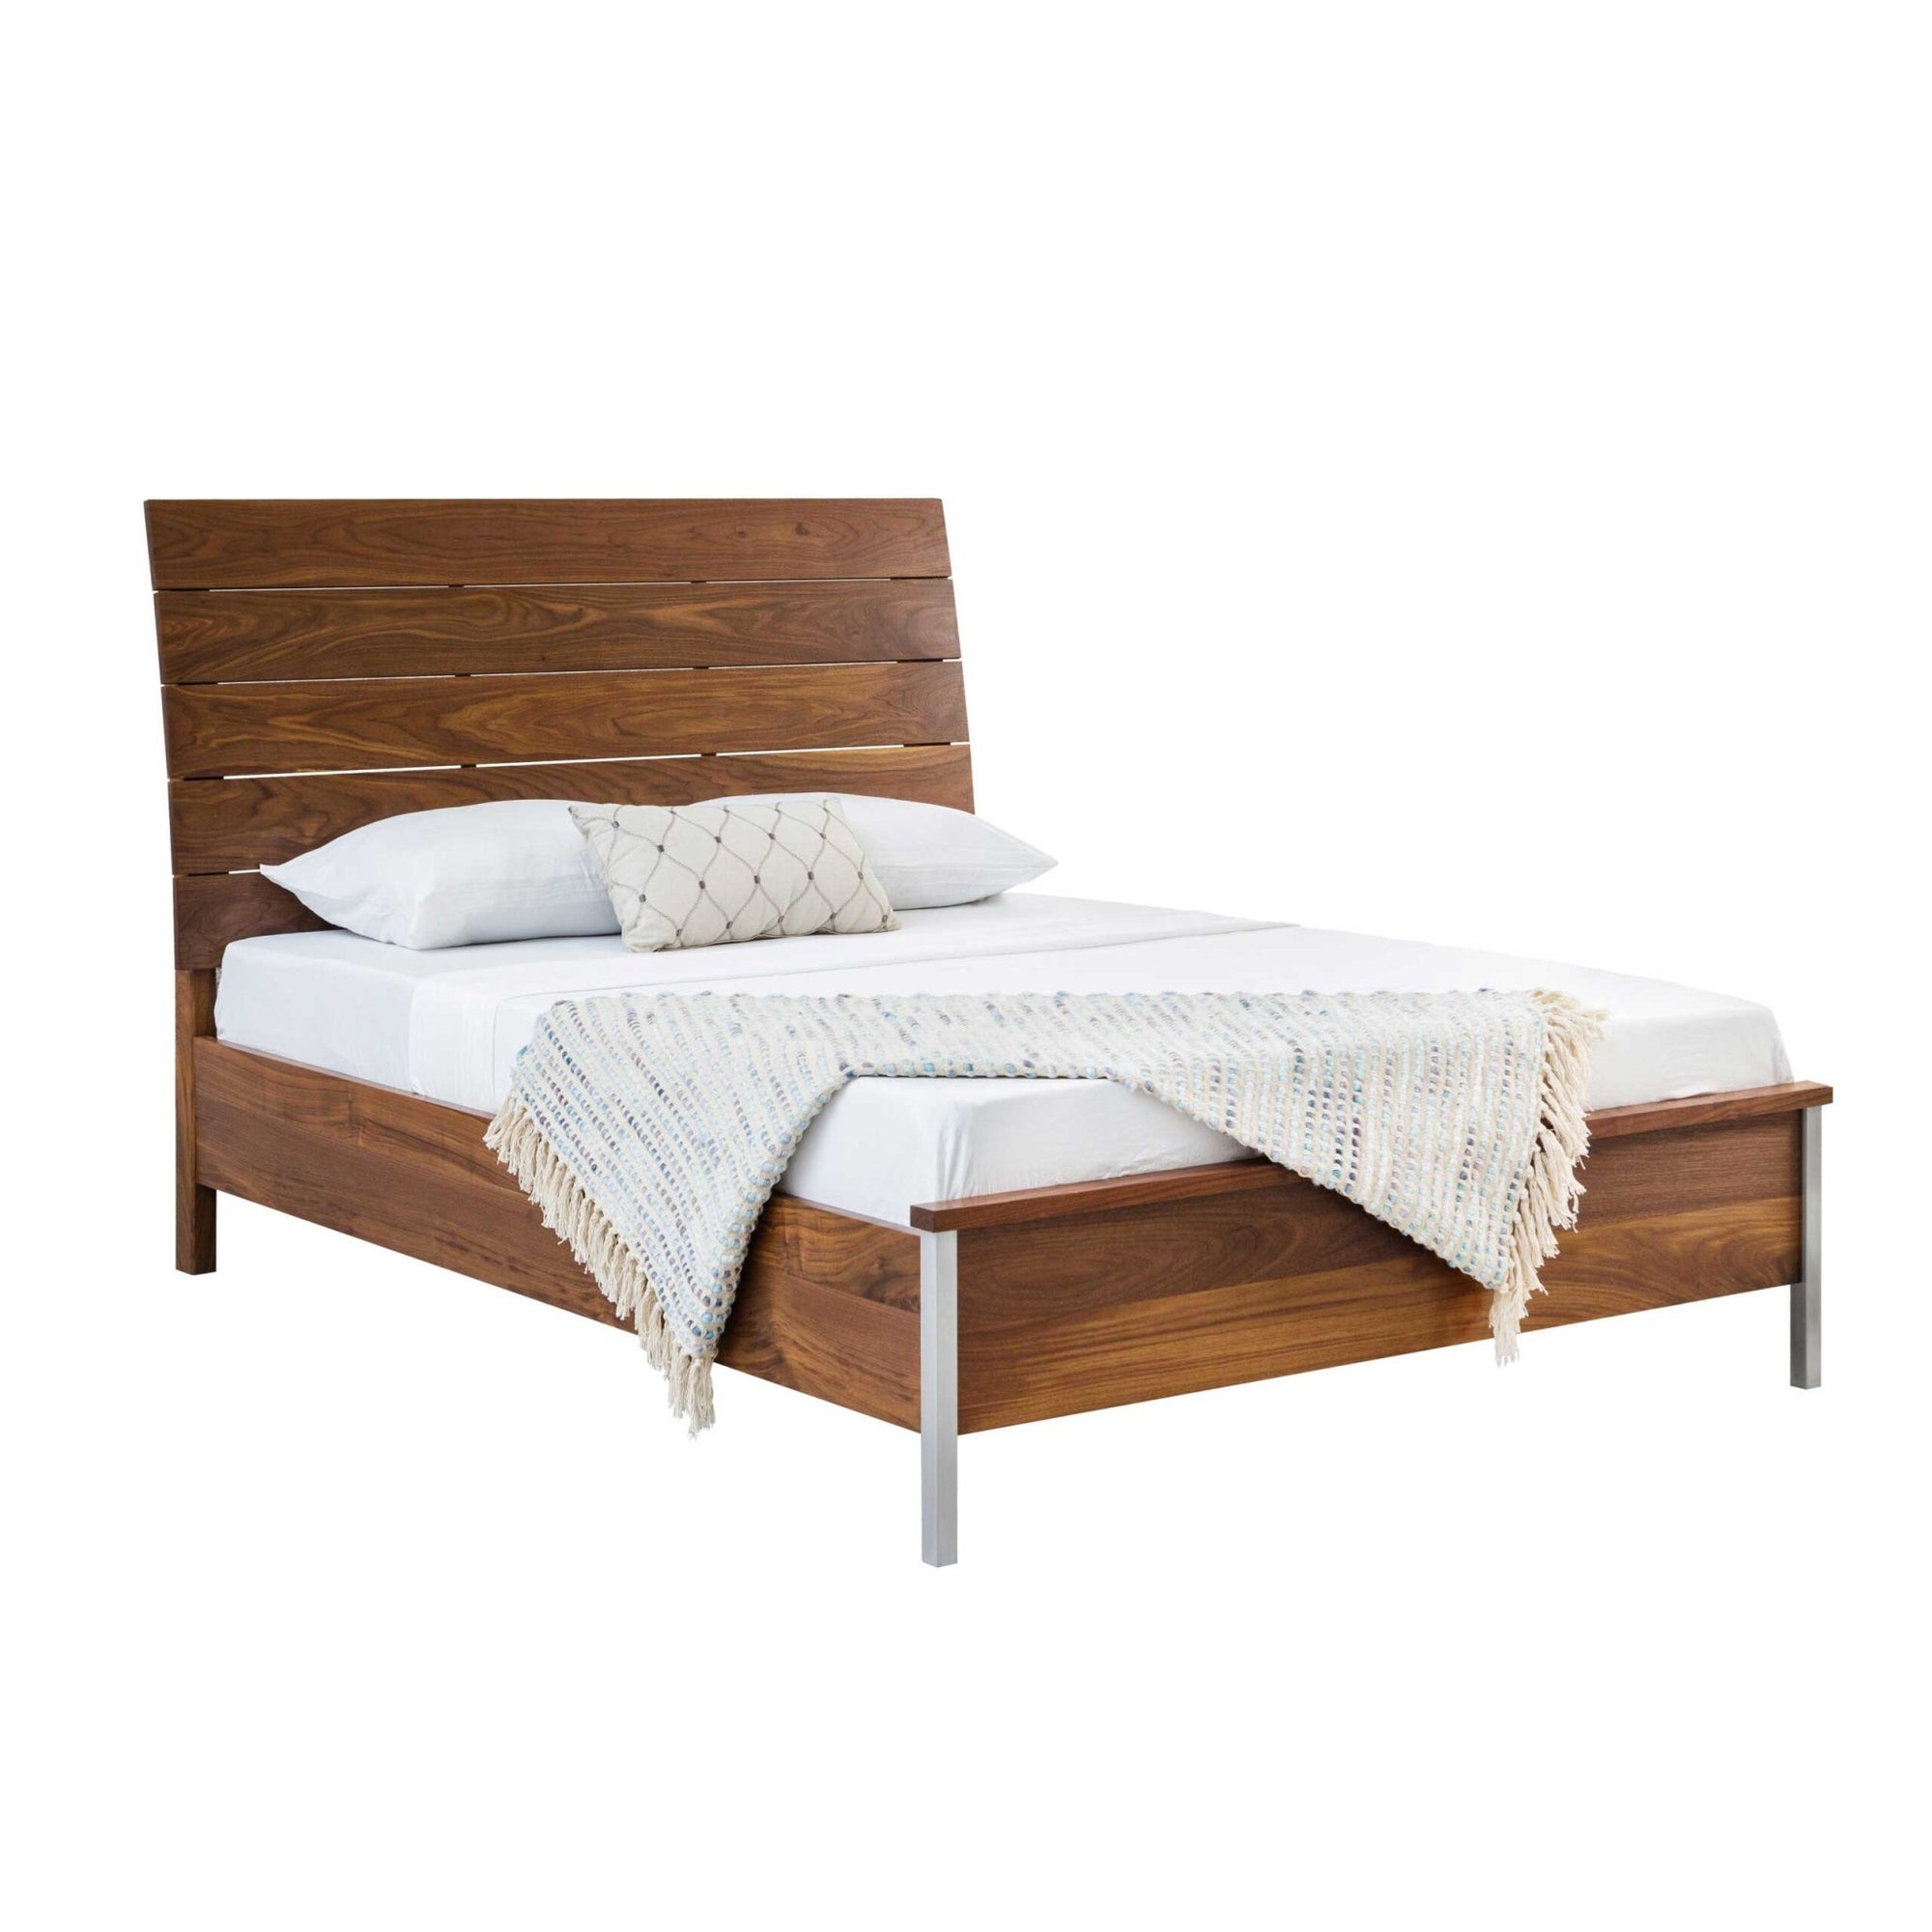 Amish Danish Solid Wood Bed - snyders.furniture